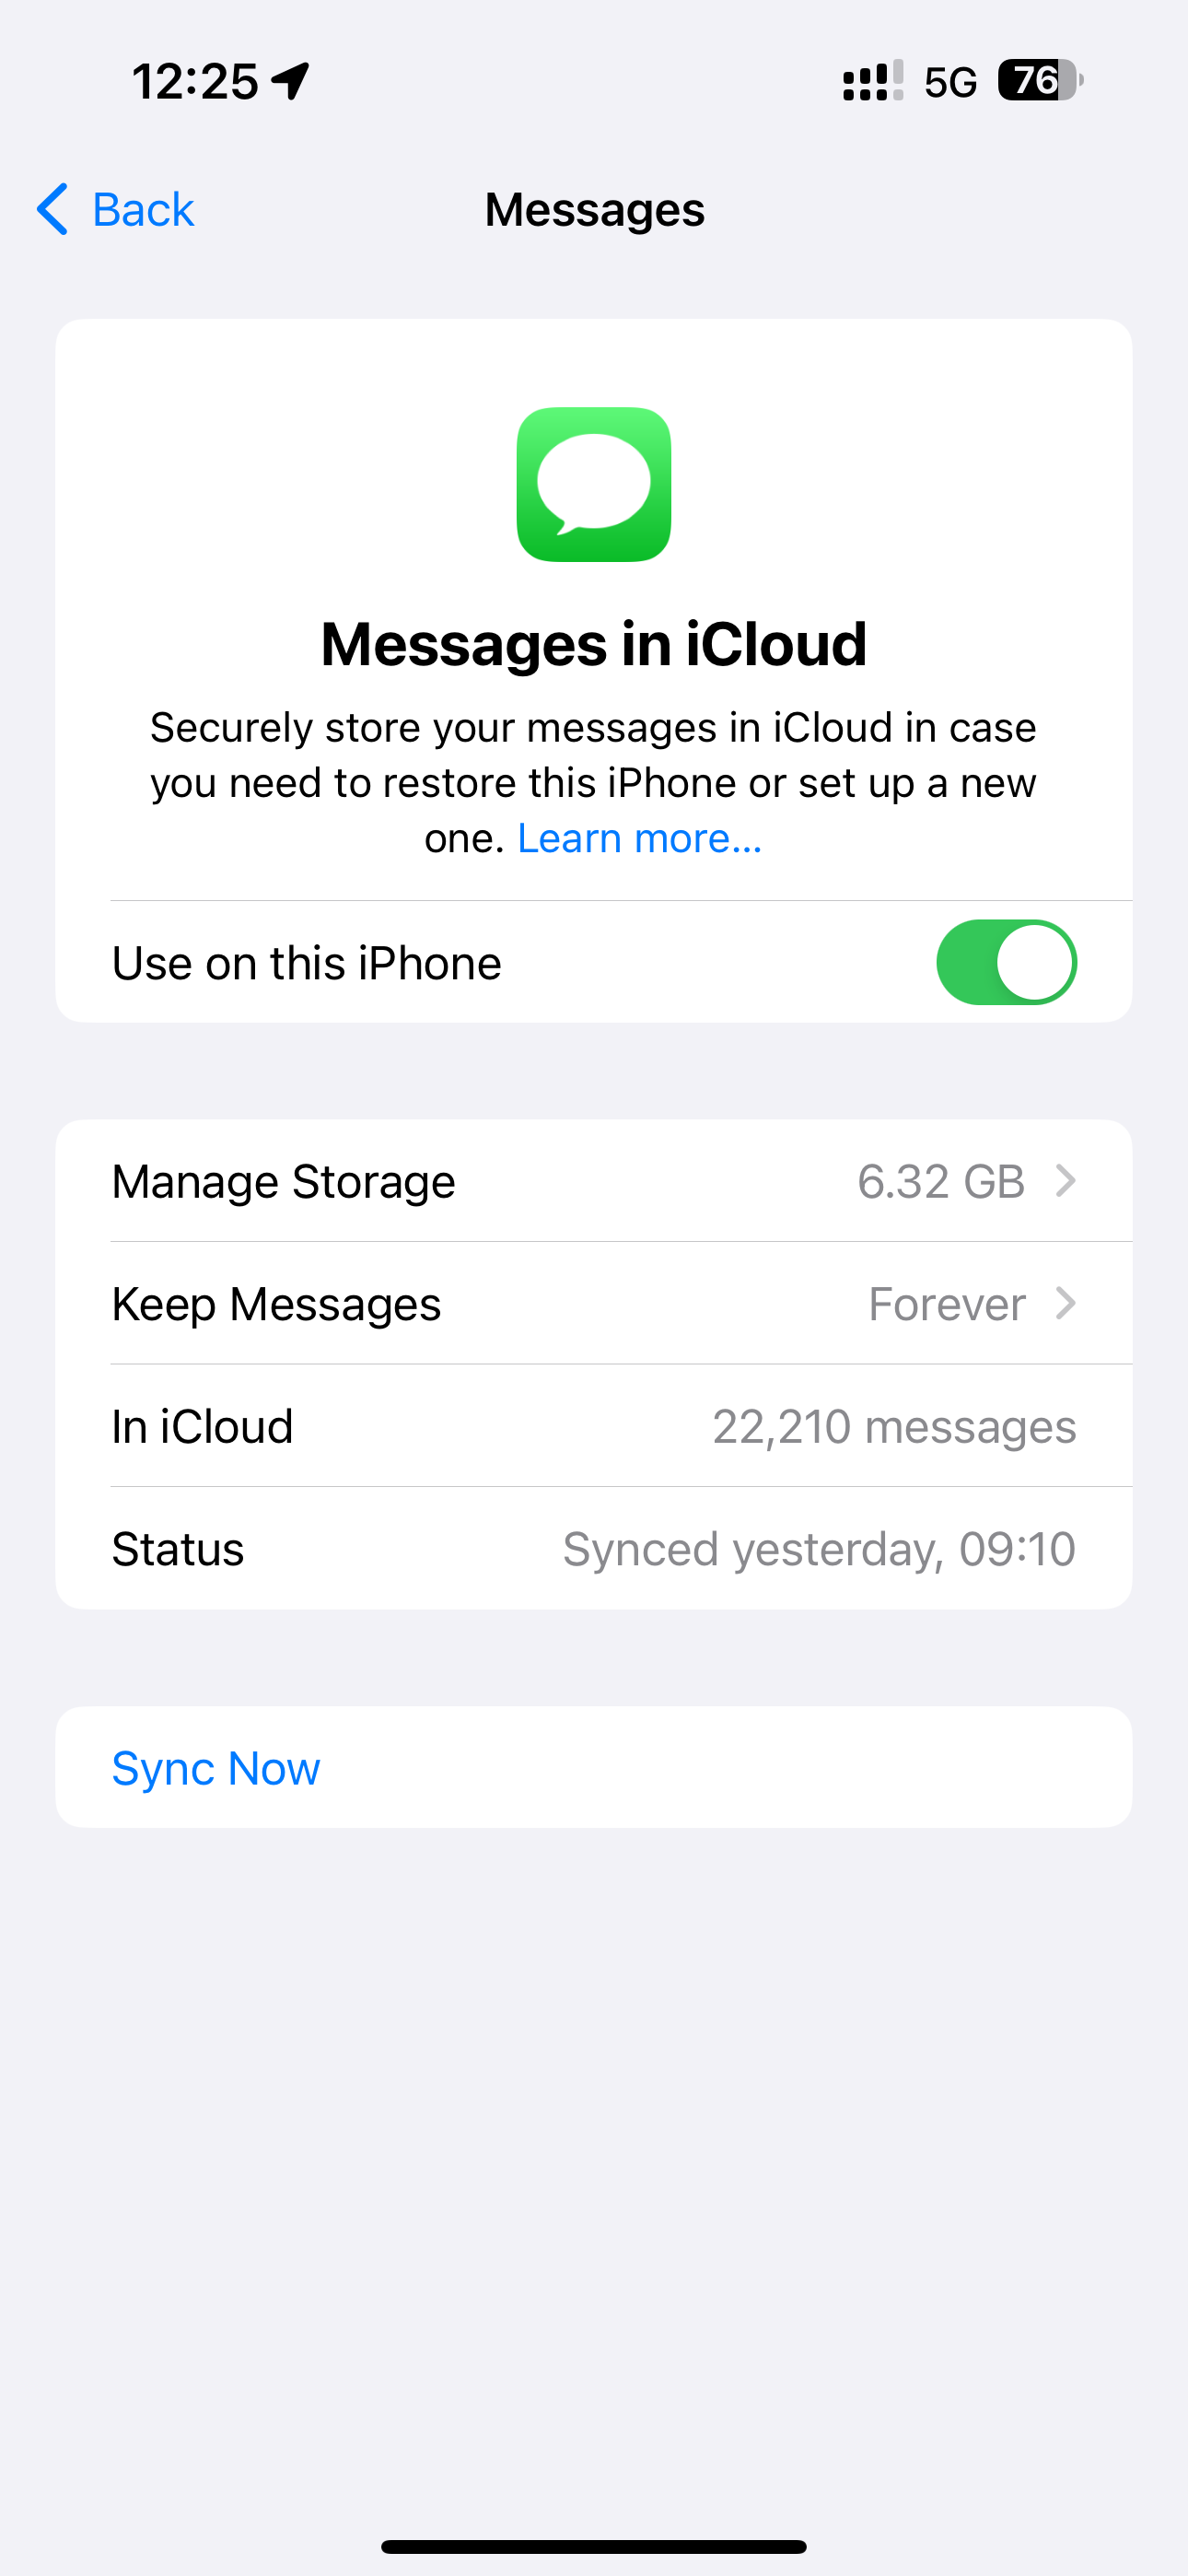 iCloud storage overview for the Messages app in the iPhone's Settings app.